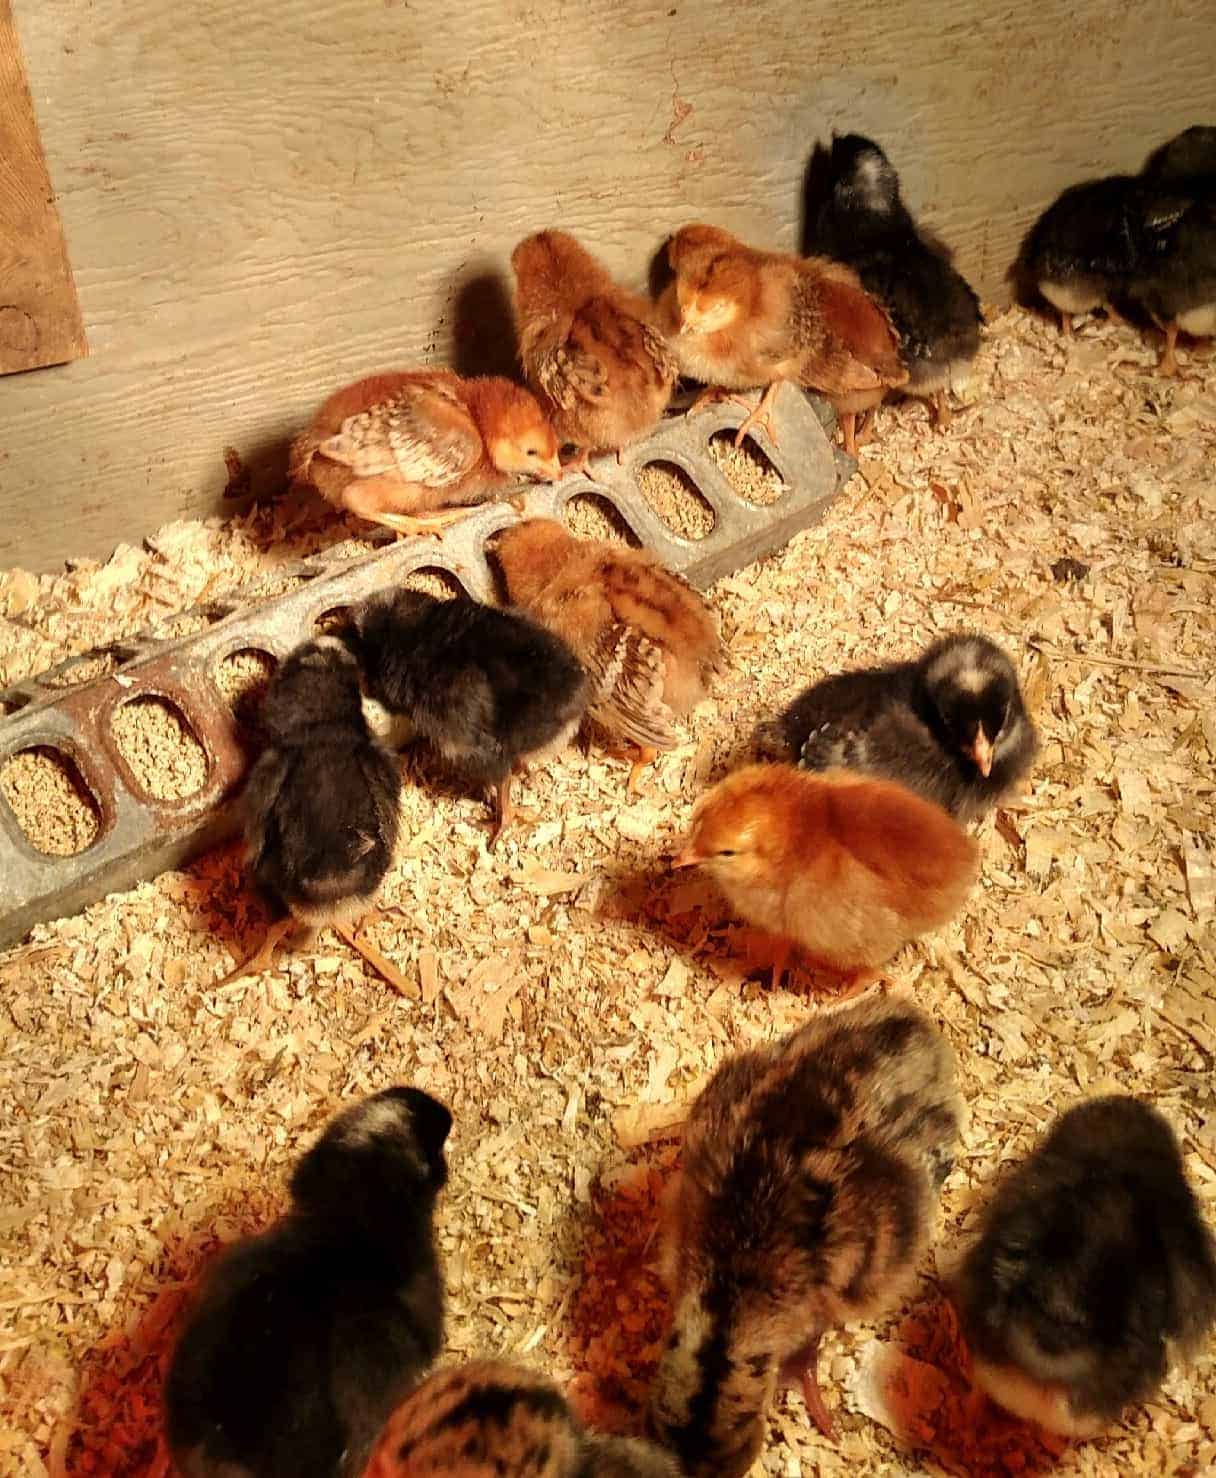 Baby chicks in a pen with wood shavings.